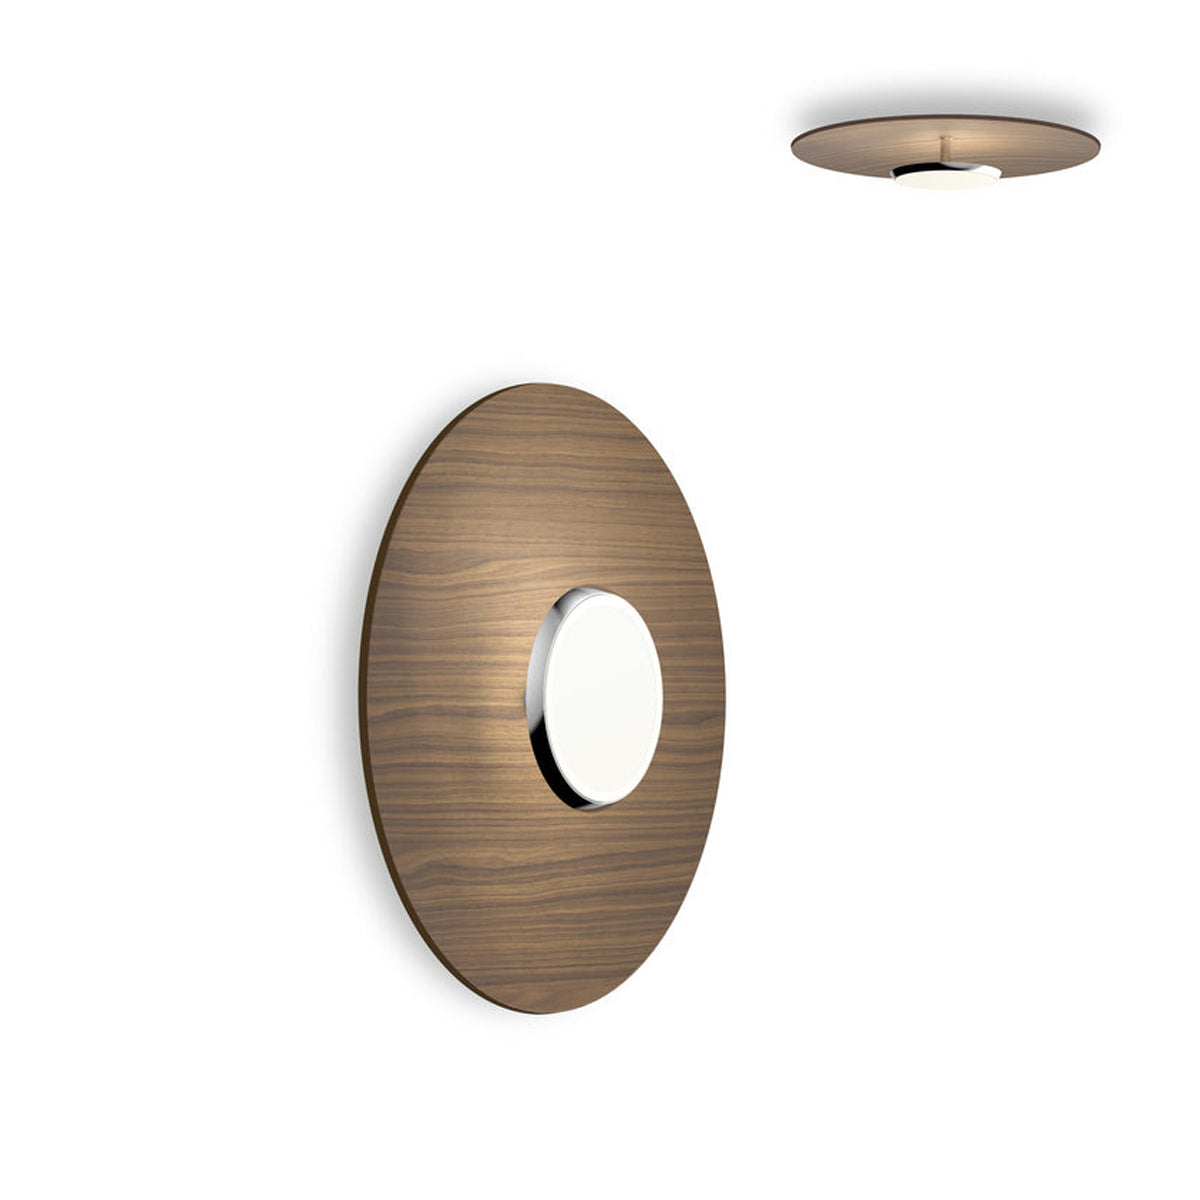 SKY Dome Flush Wall/Celling Mounted Wood